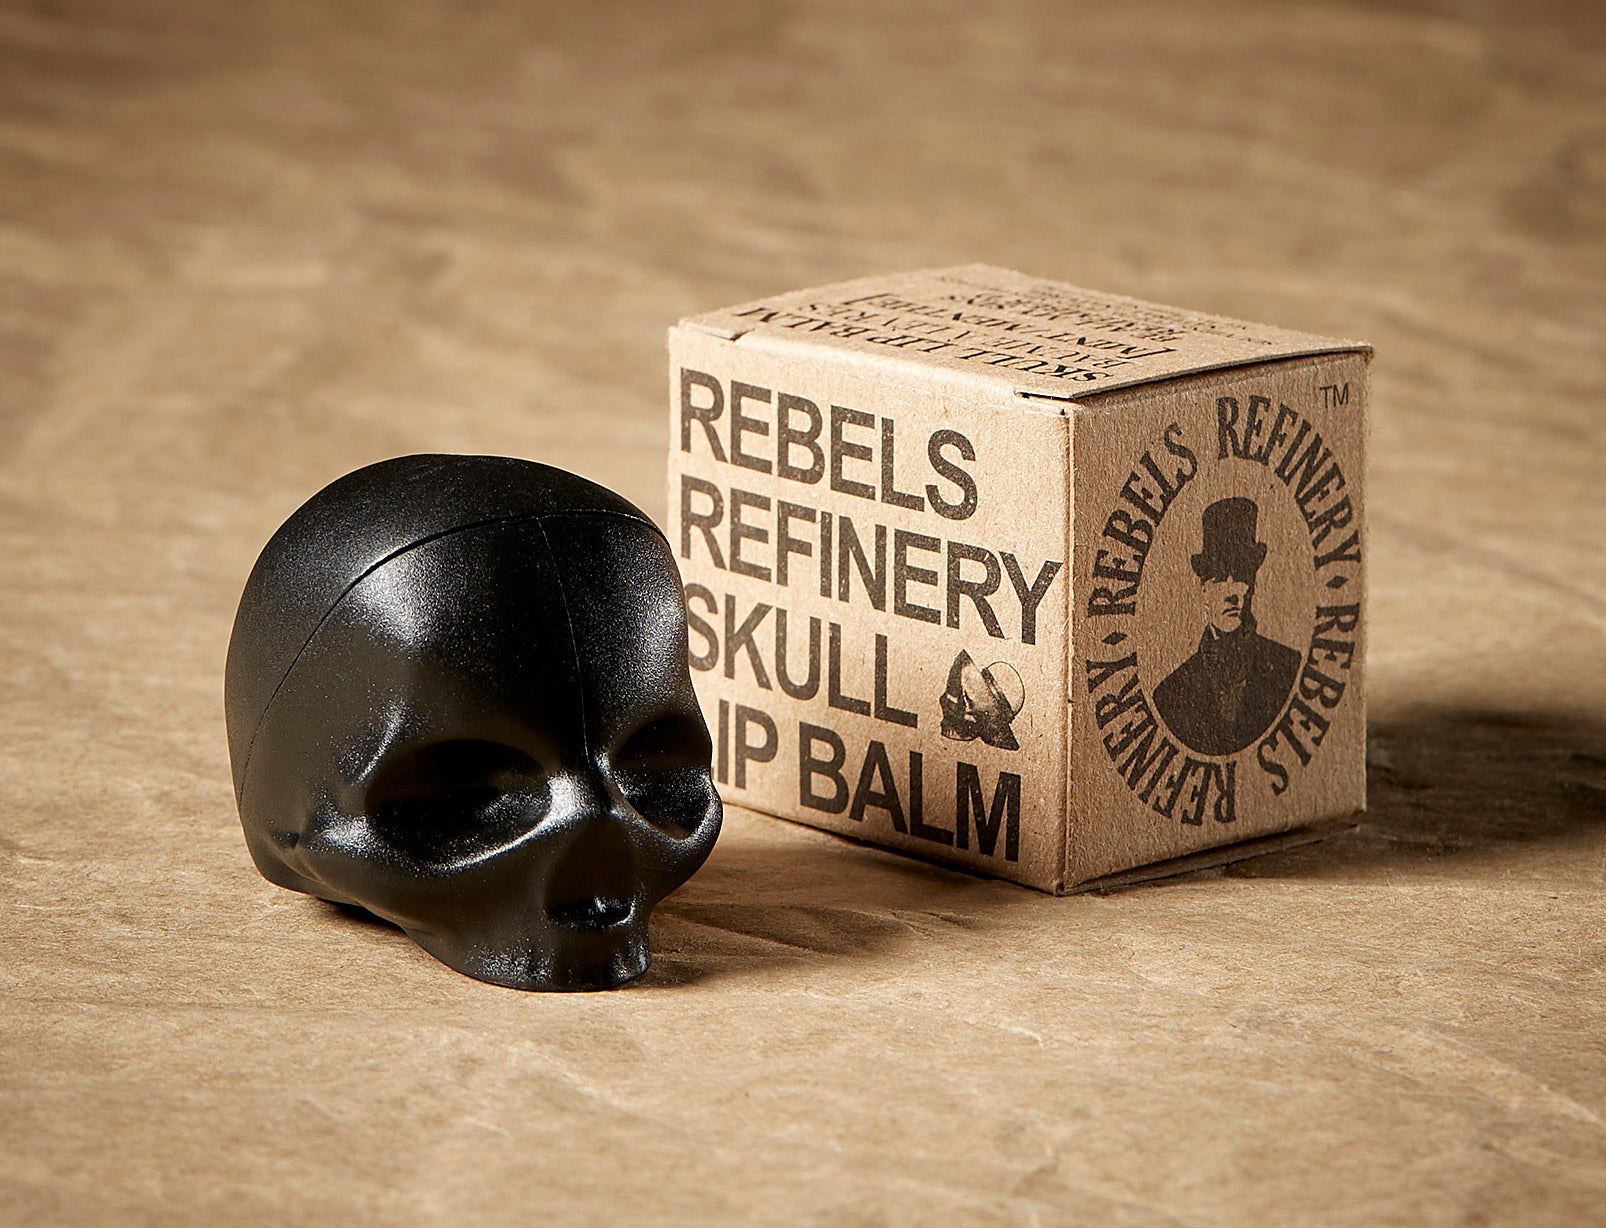 A skull-shaped lip balm next to the box it came in